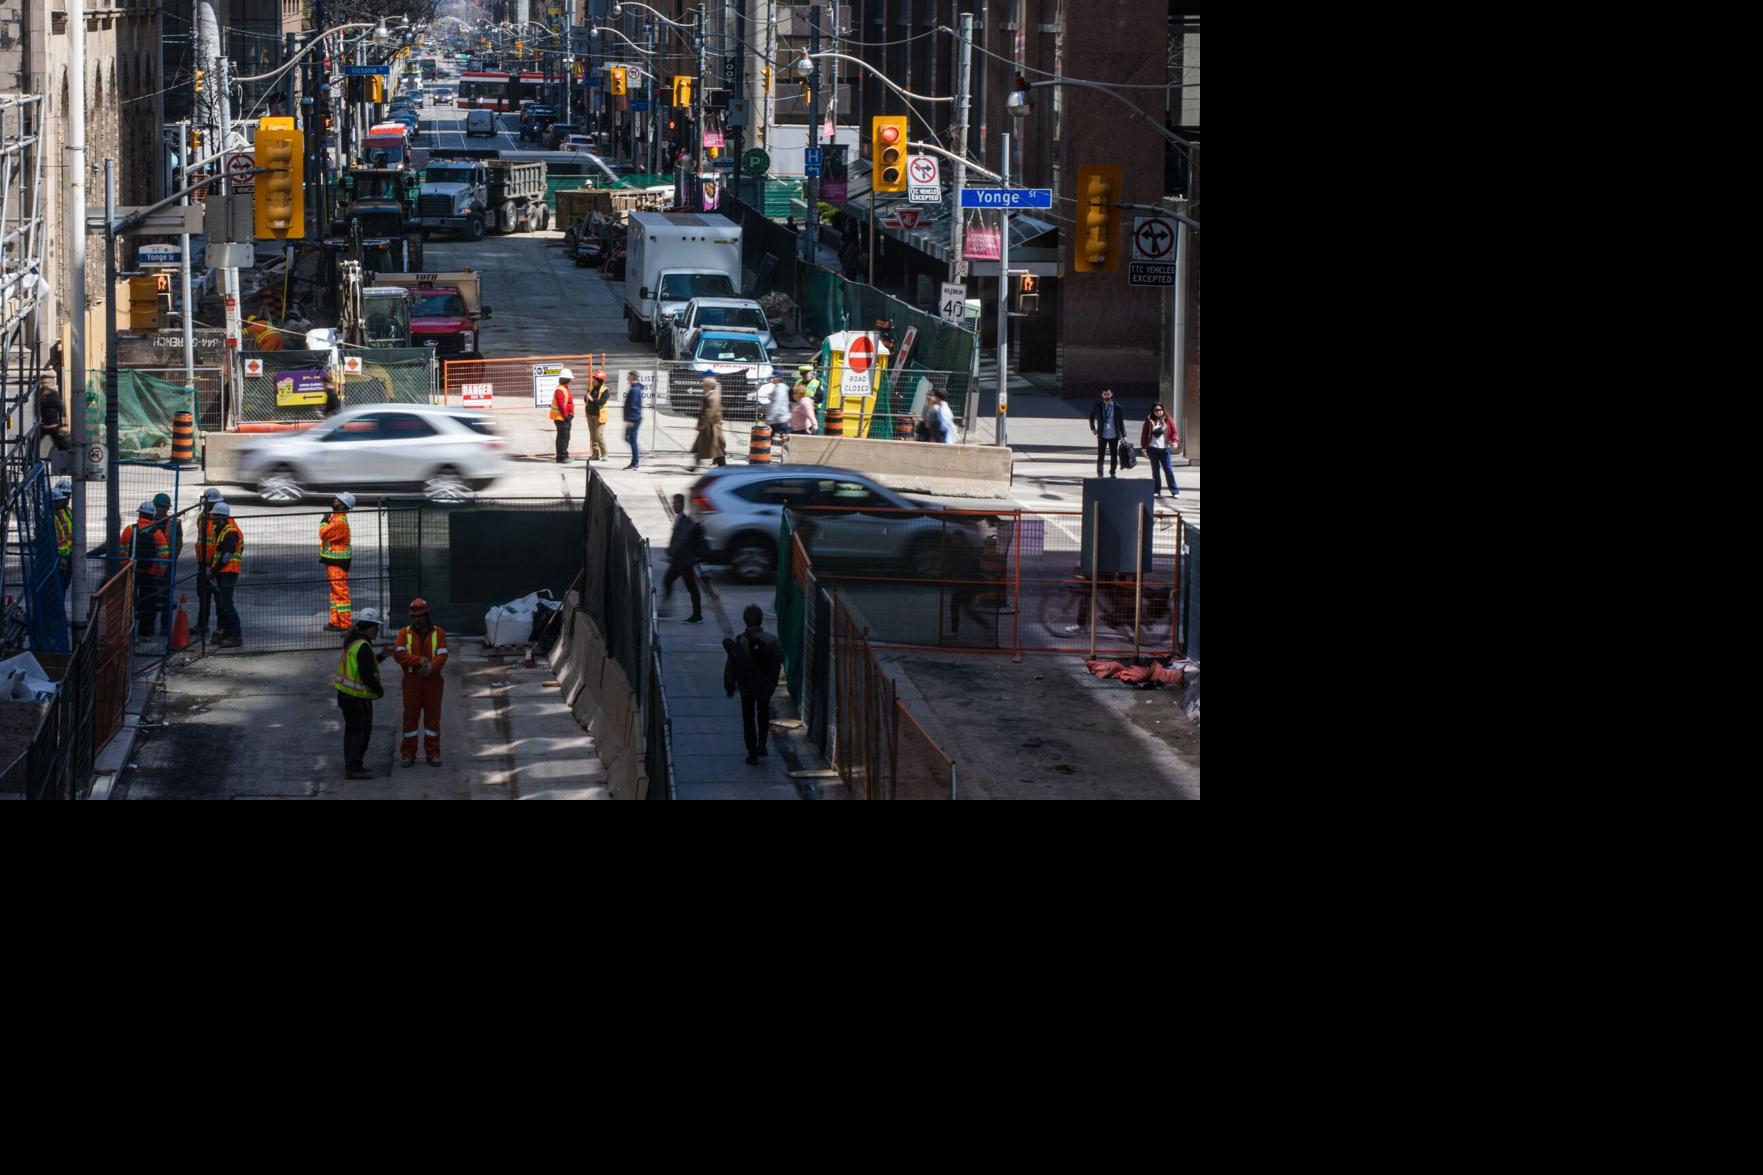 I wrote a book on strolling Toronto in 2010. The city has changed, for better or worse